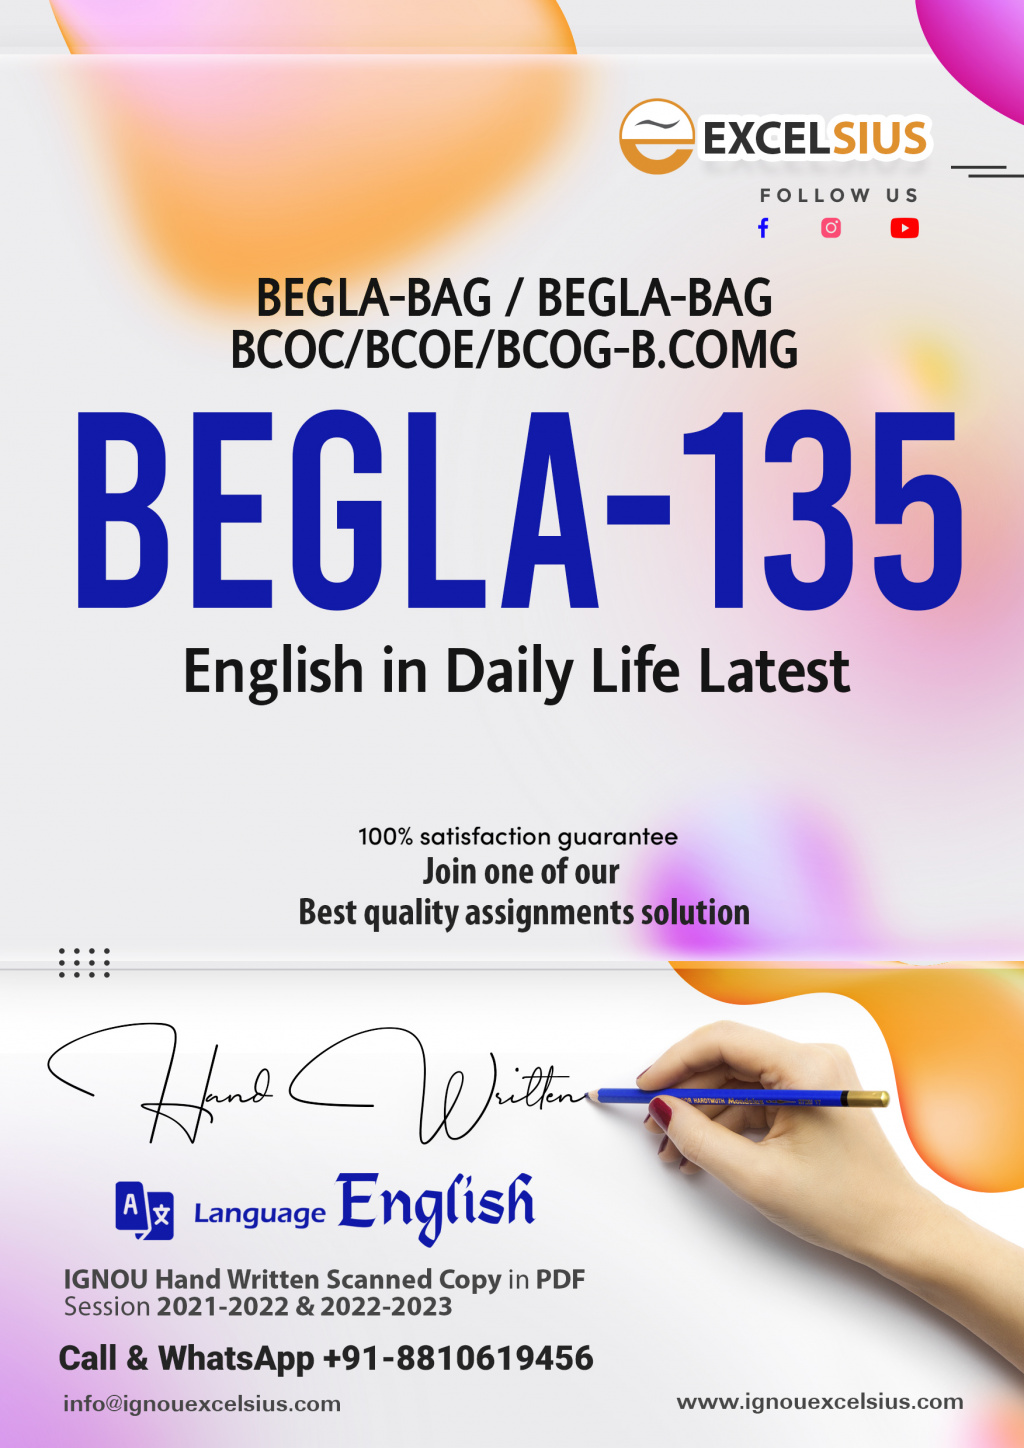 IGNOU BEGLA-135 - English in Daily Life Latest Solved Assignment -July 2022 – January 2023